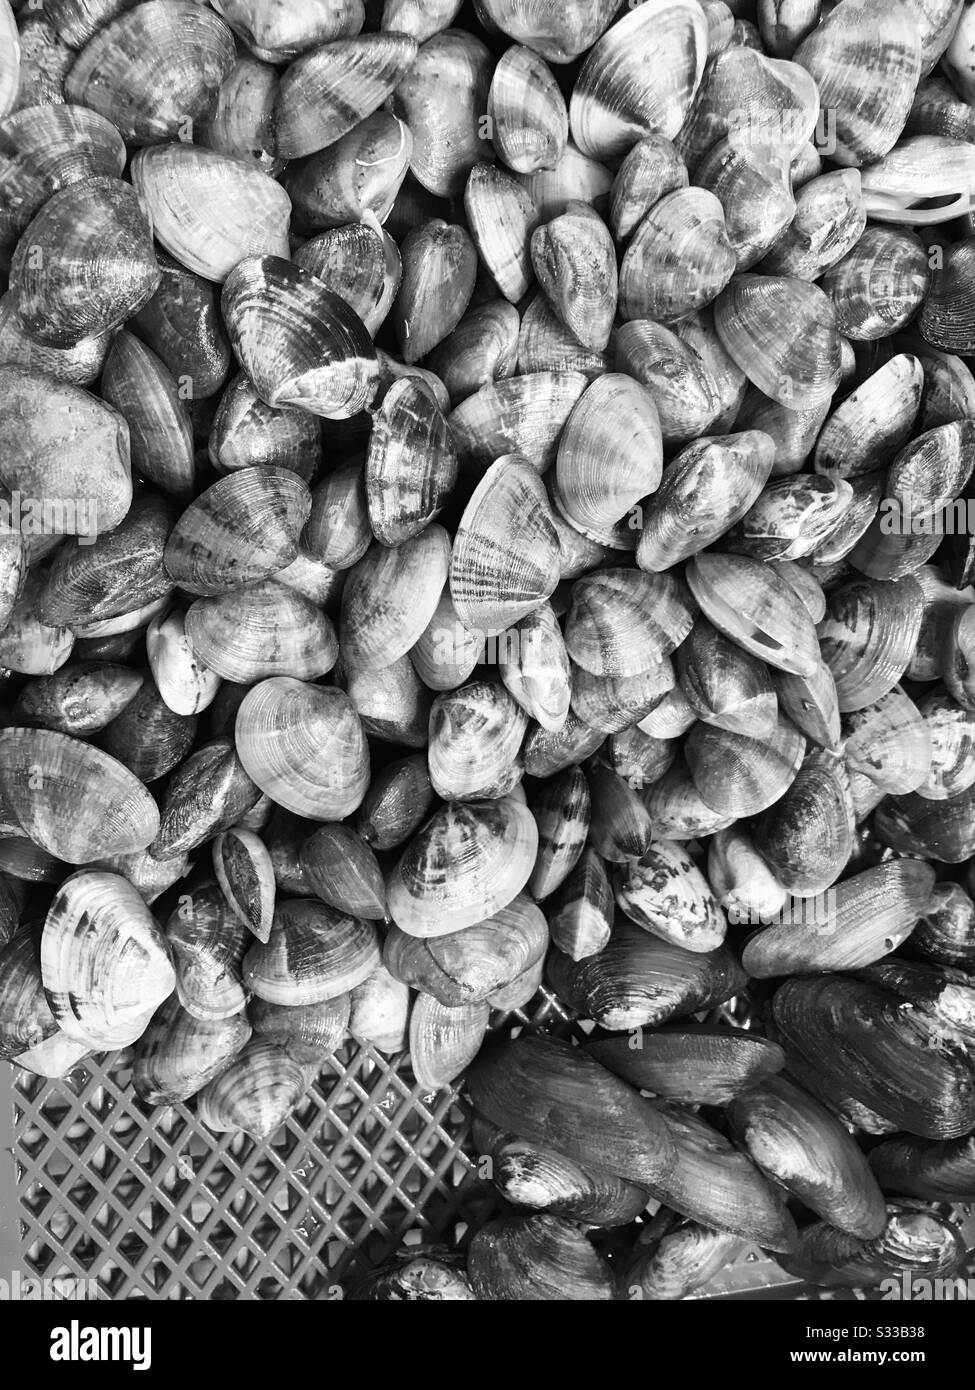 Cockles in a basket on sale in singapore fish market - black & white mode -  Shells & mussels Stock Photo - Alamy